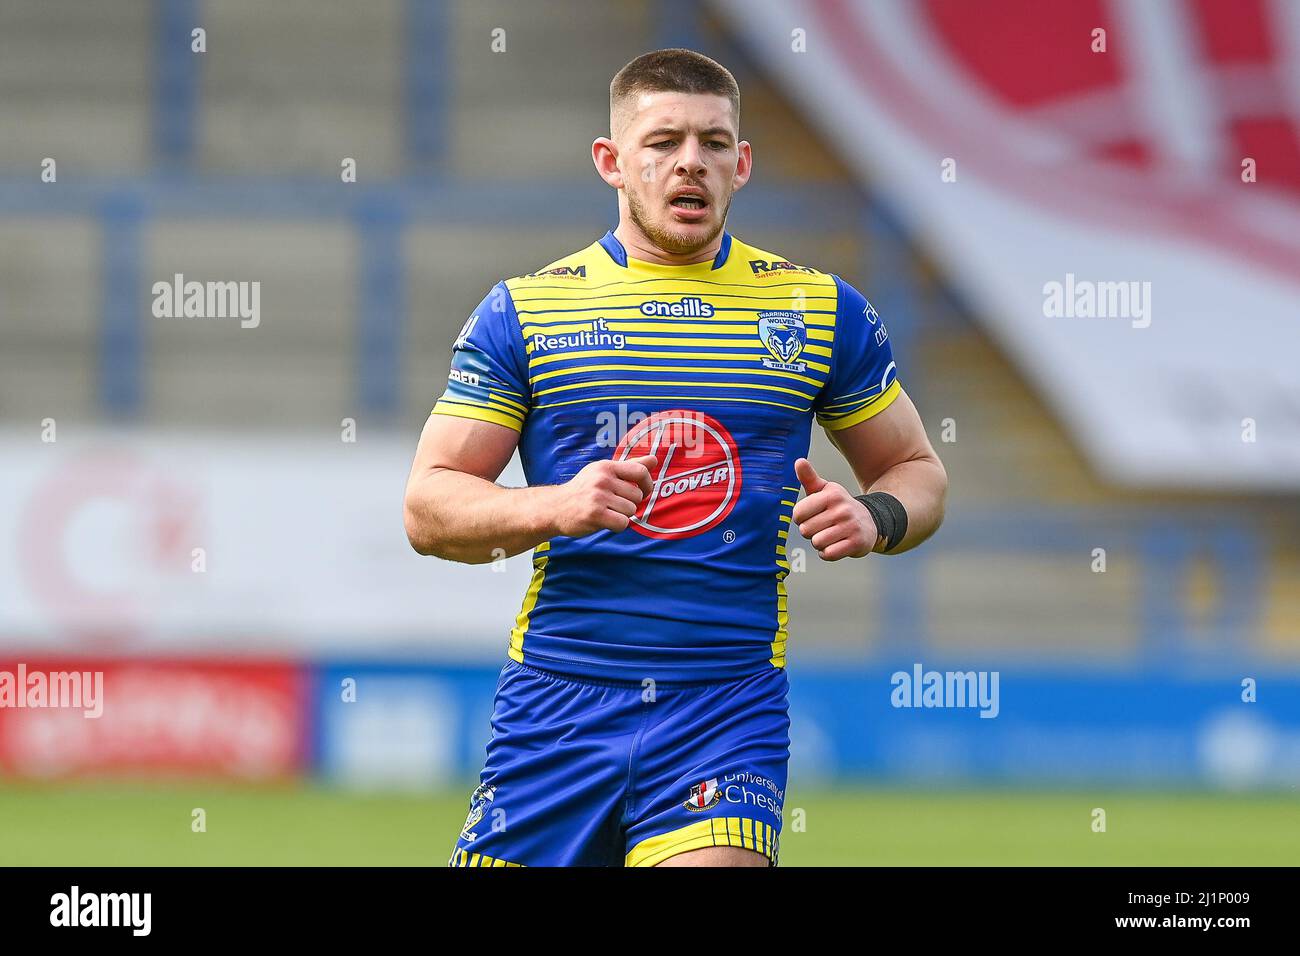 Danny Walker #16 of Warrington Wolves during the game Stock Photo